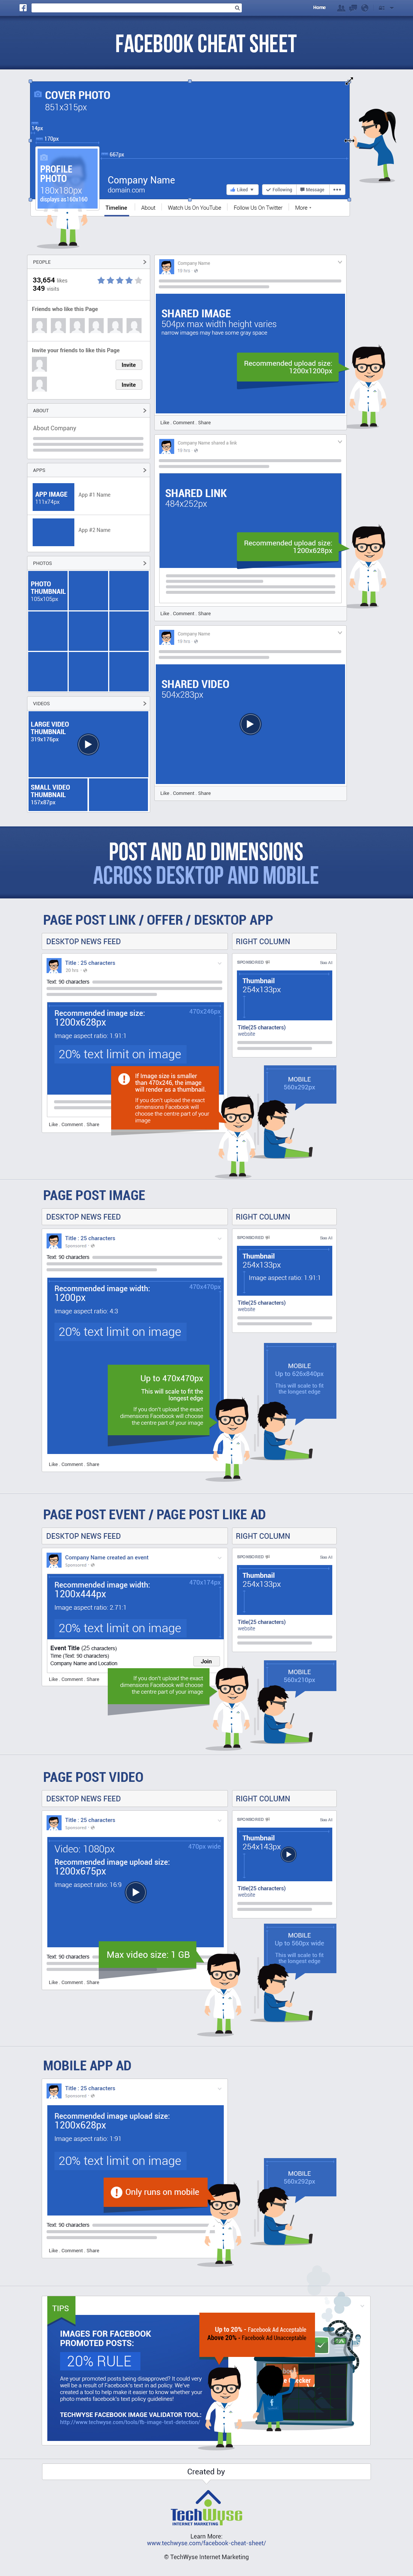 facebook-cheat-sheet-size-and-dimensions-enlarge